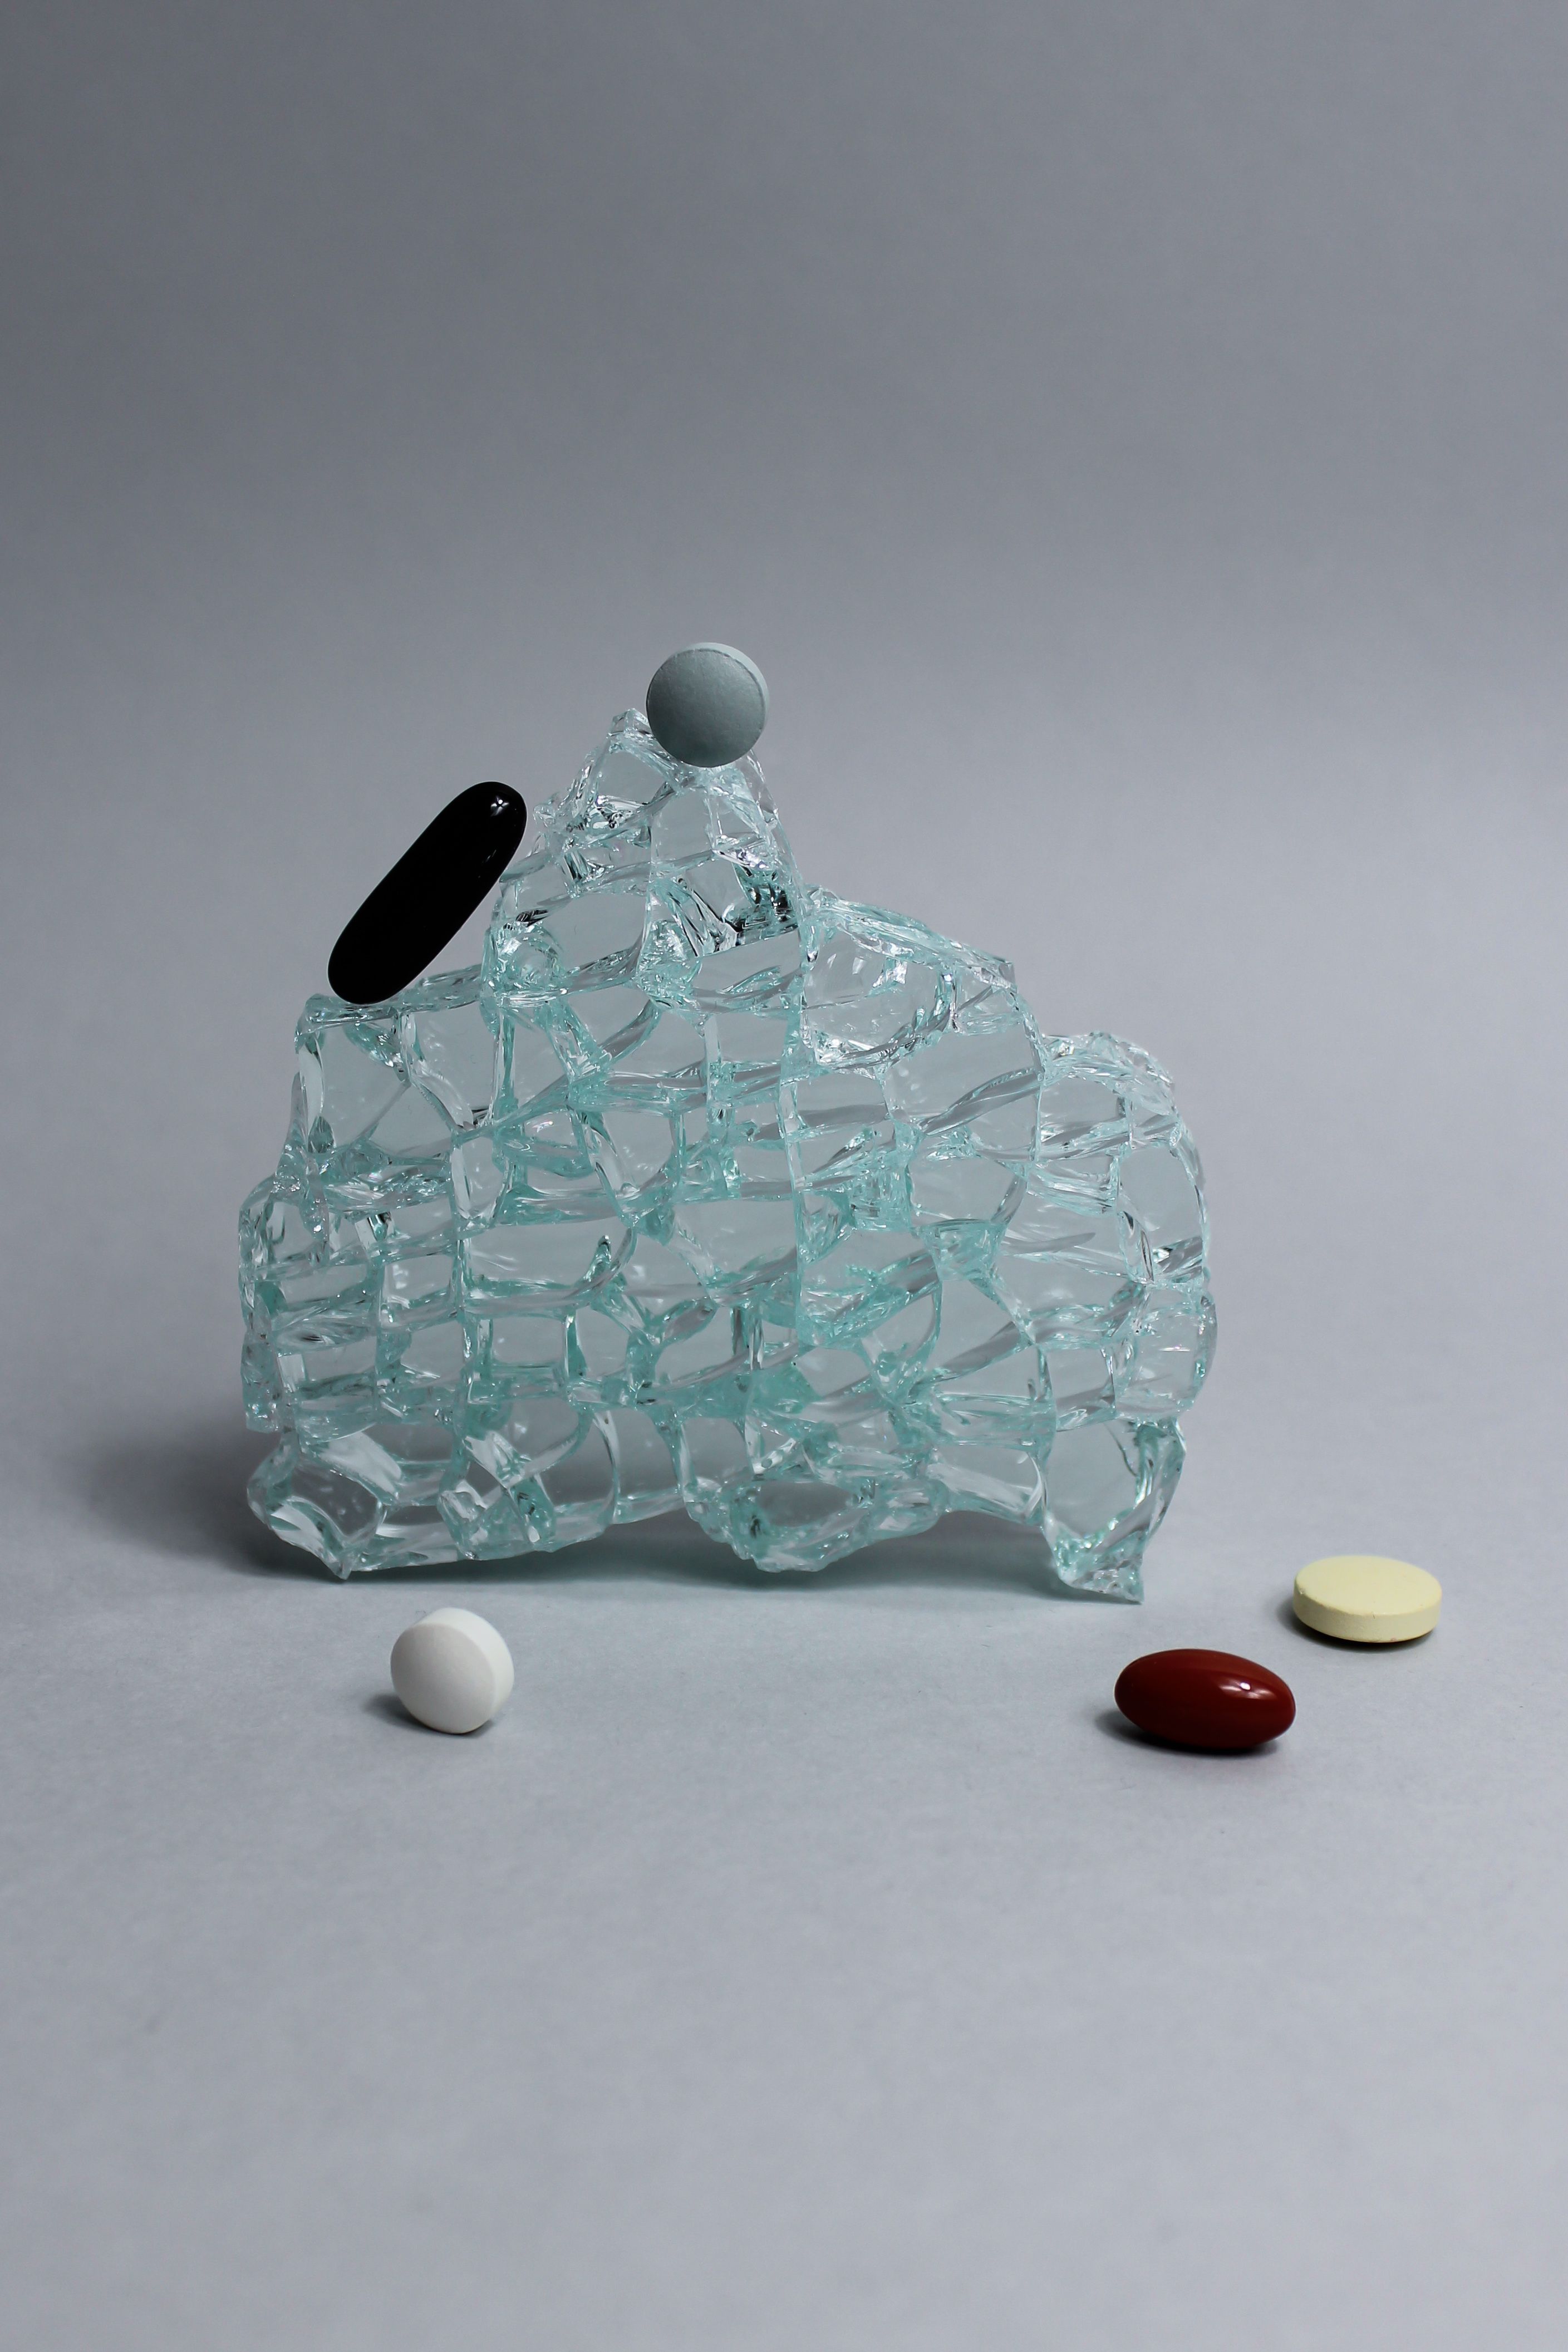 Glass tile surrounded by pills